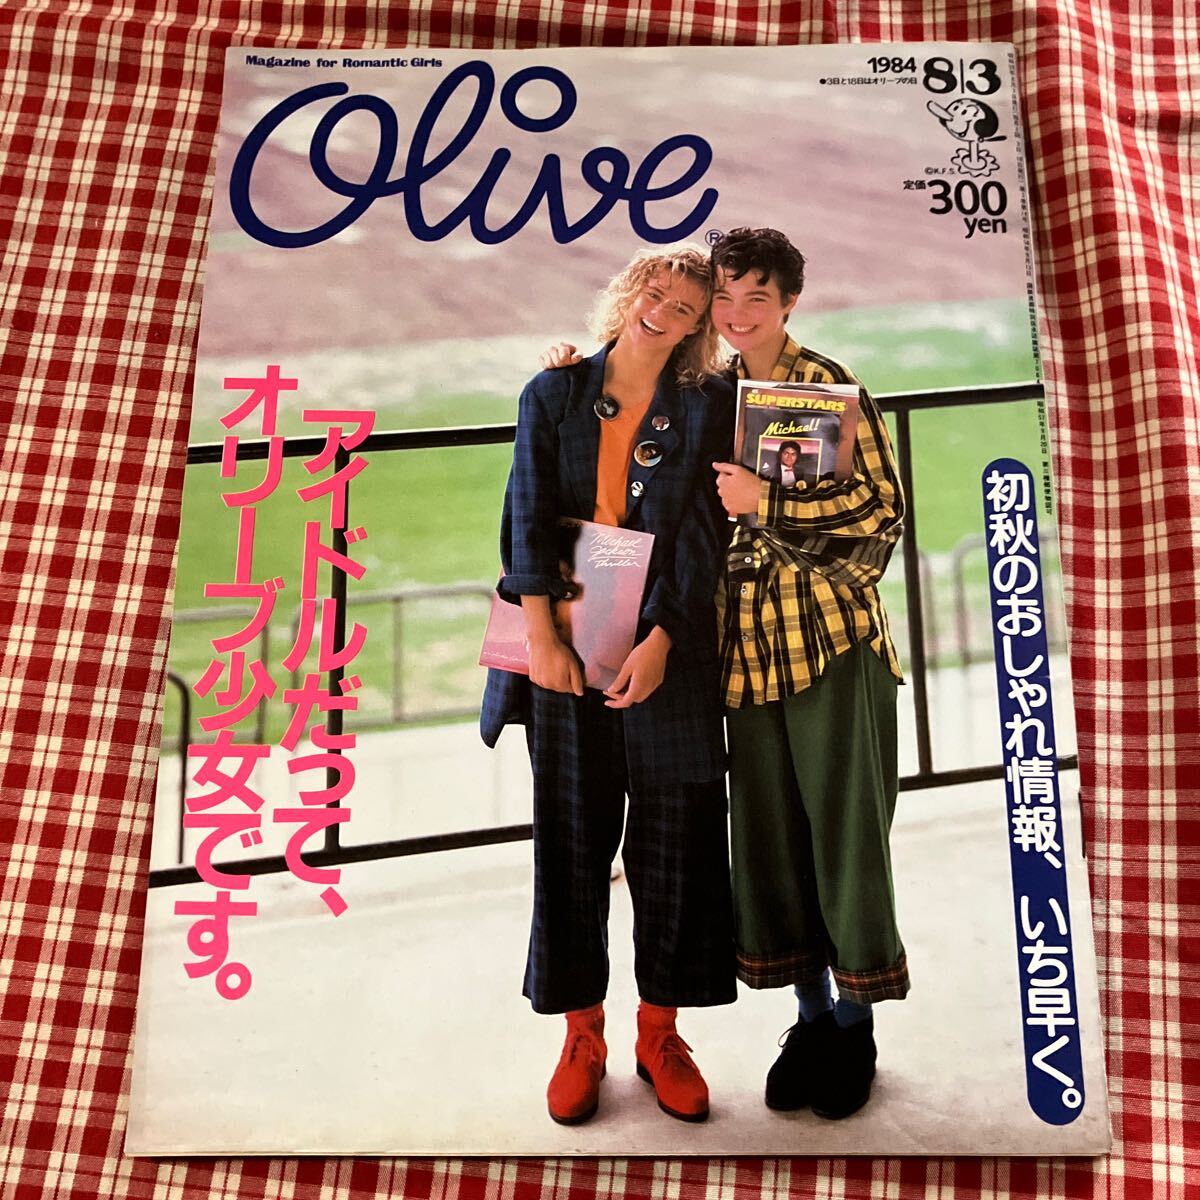 1984 year 8 month 3 day number magazine fashion magazine olive OLIVE Showa Retro that time thing tea n magazine Olive magazine house 